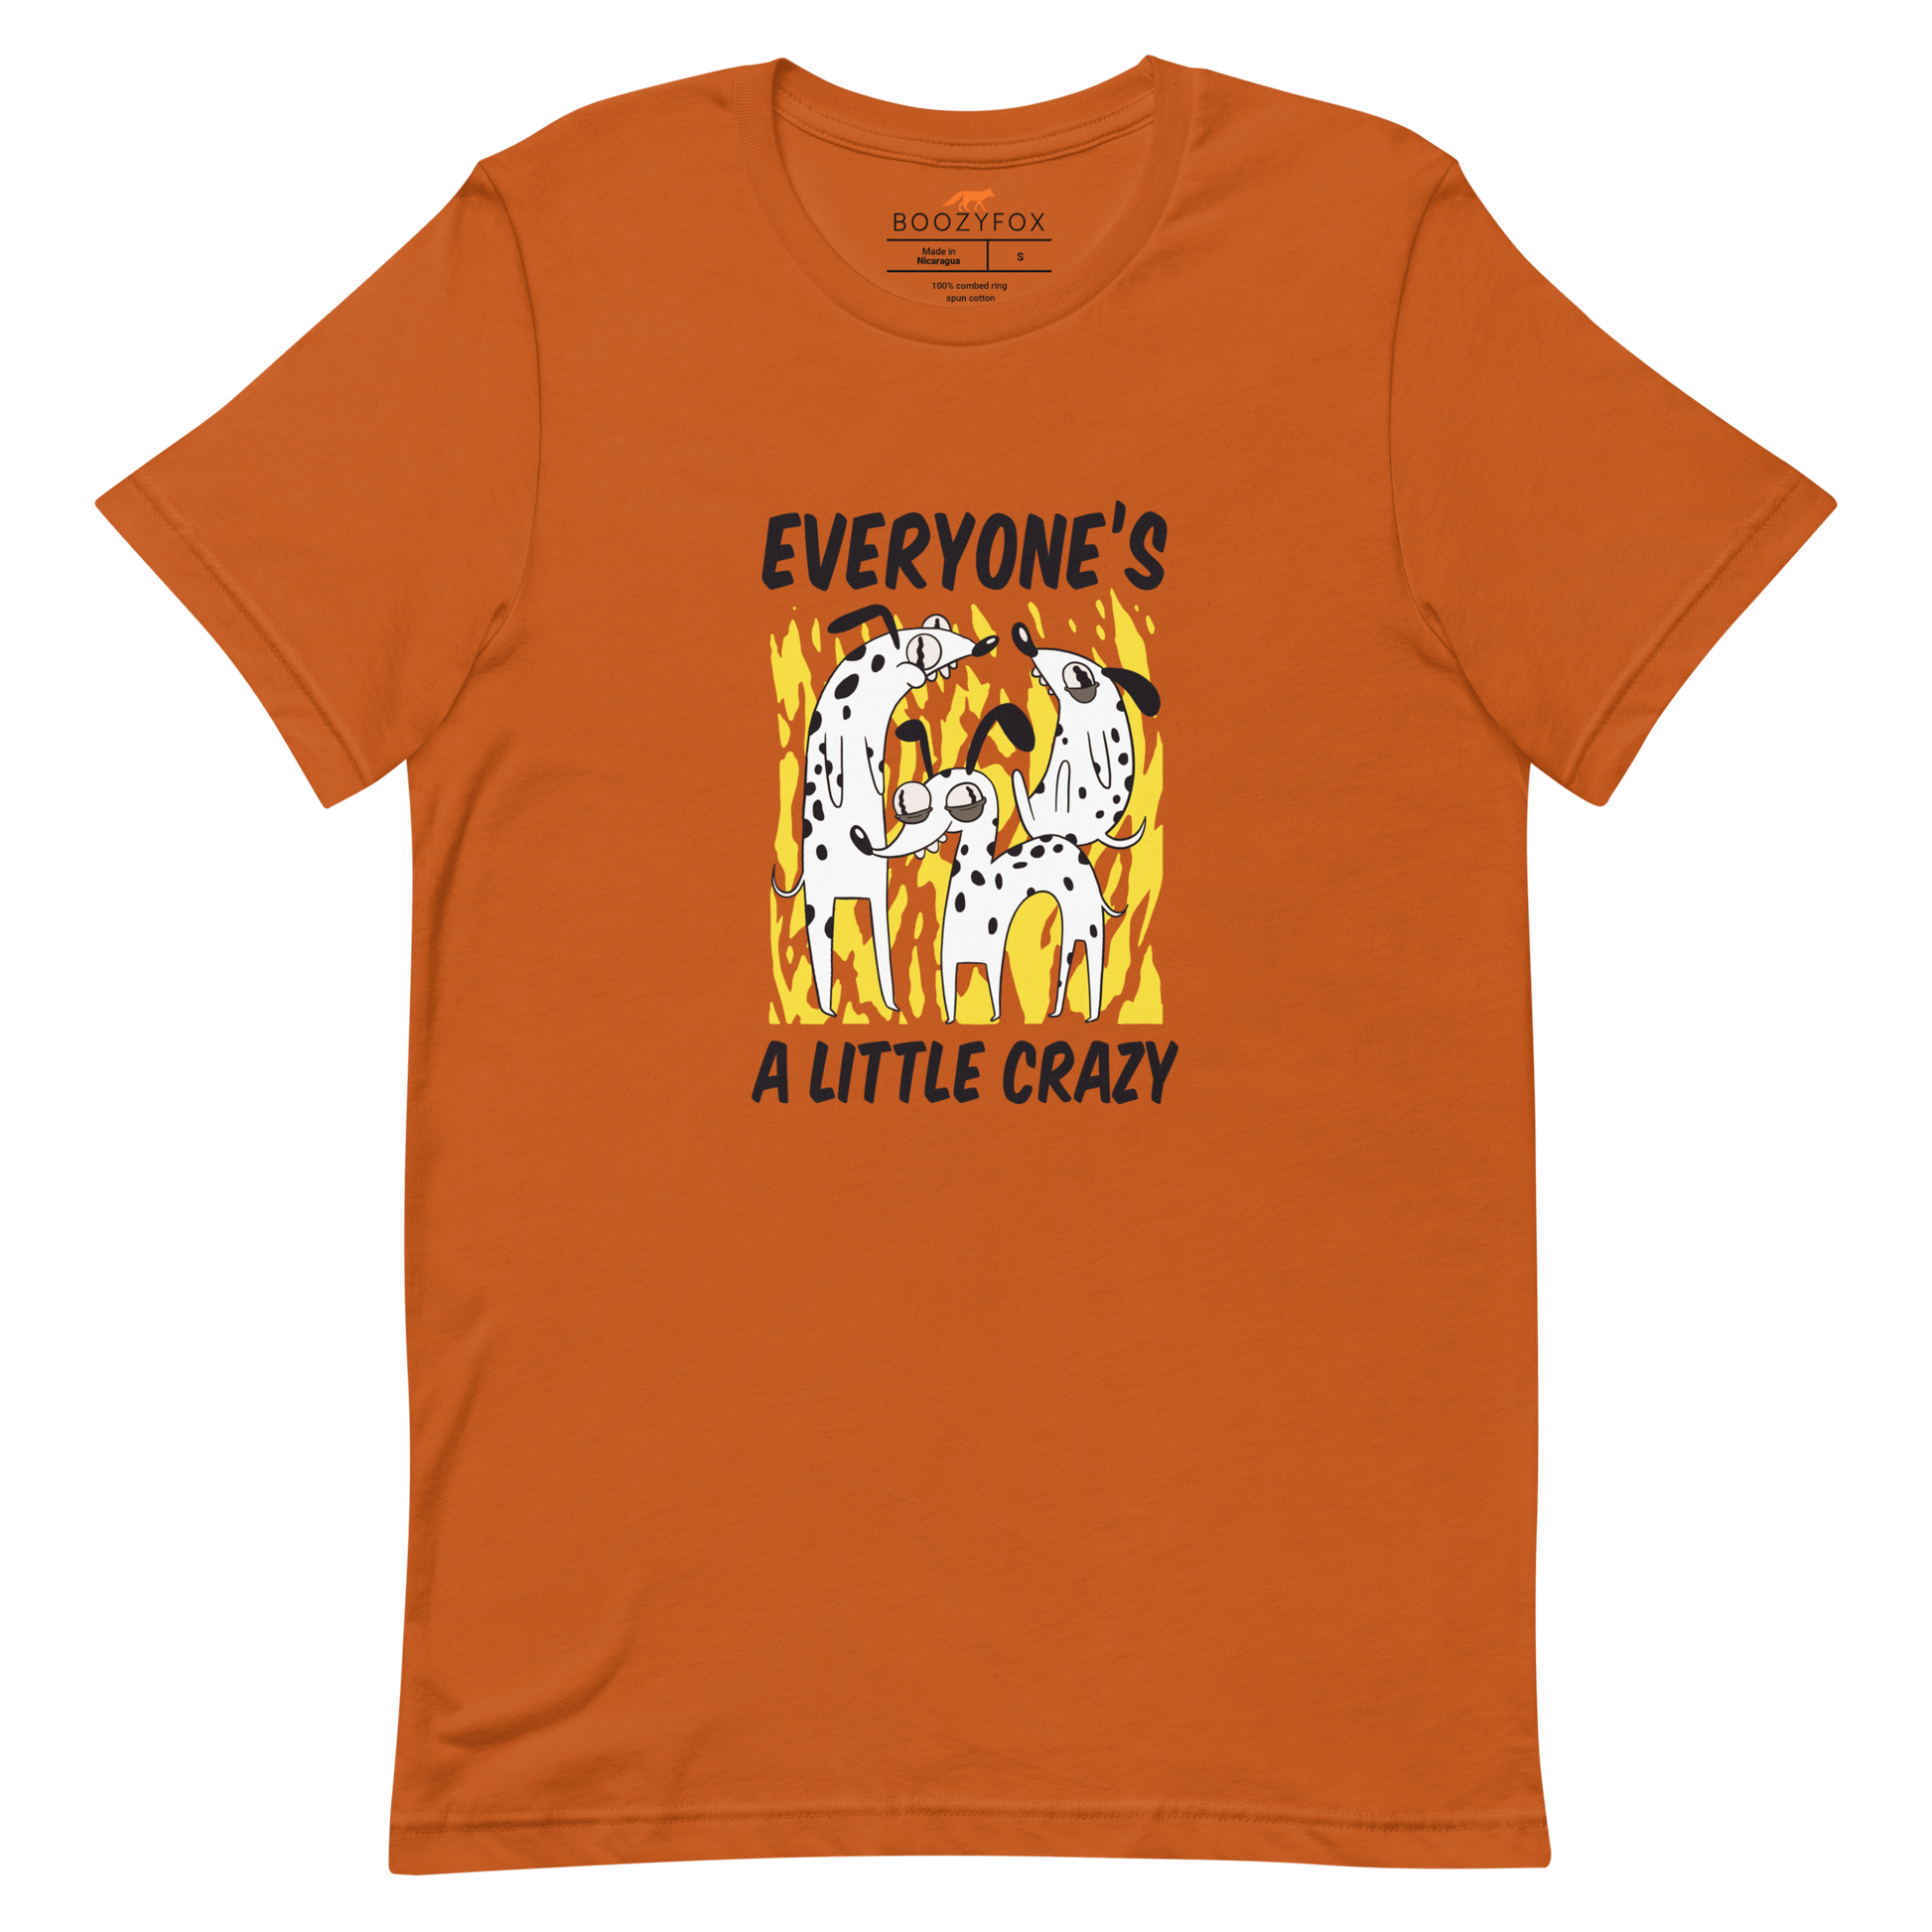 Autumn Color Premium Dog T-Shirt featuring a Everyone's A Little Crazy graphic on the chest - Funny Graphic Dog Tees - Boozy Fox